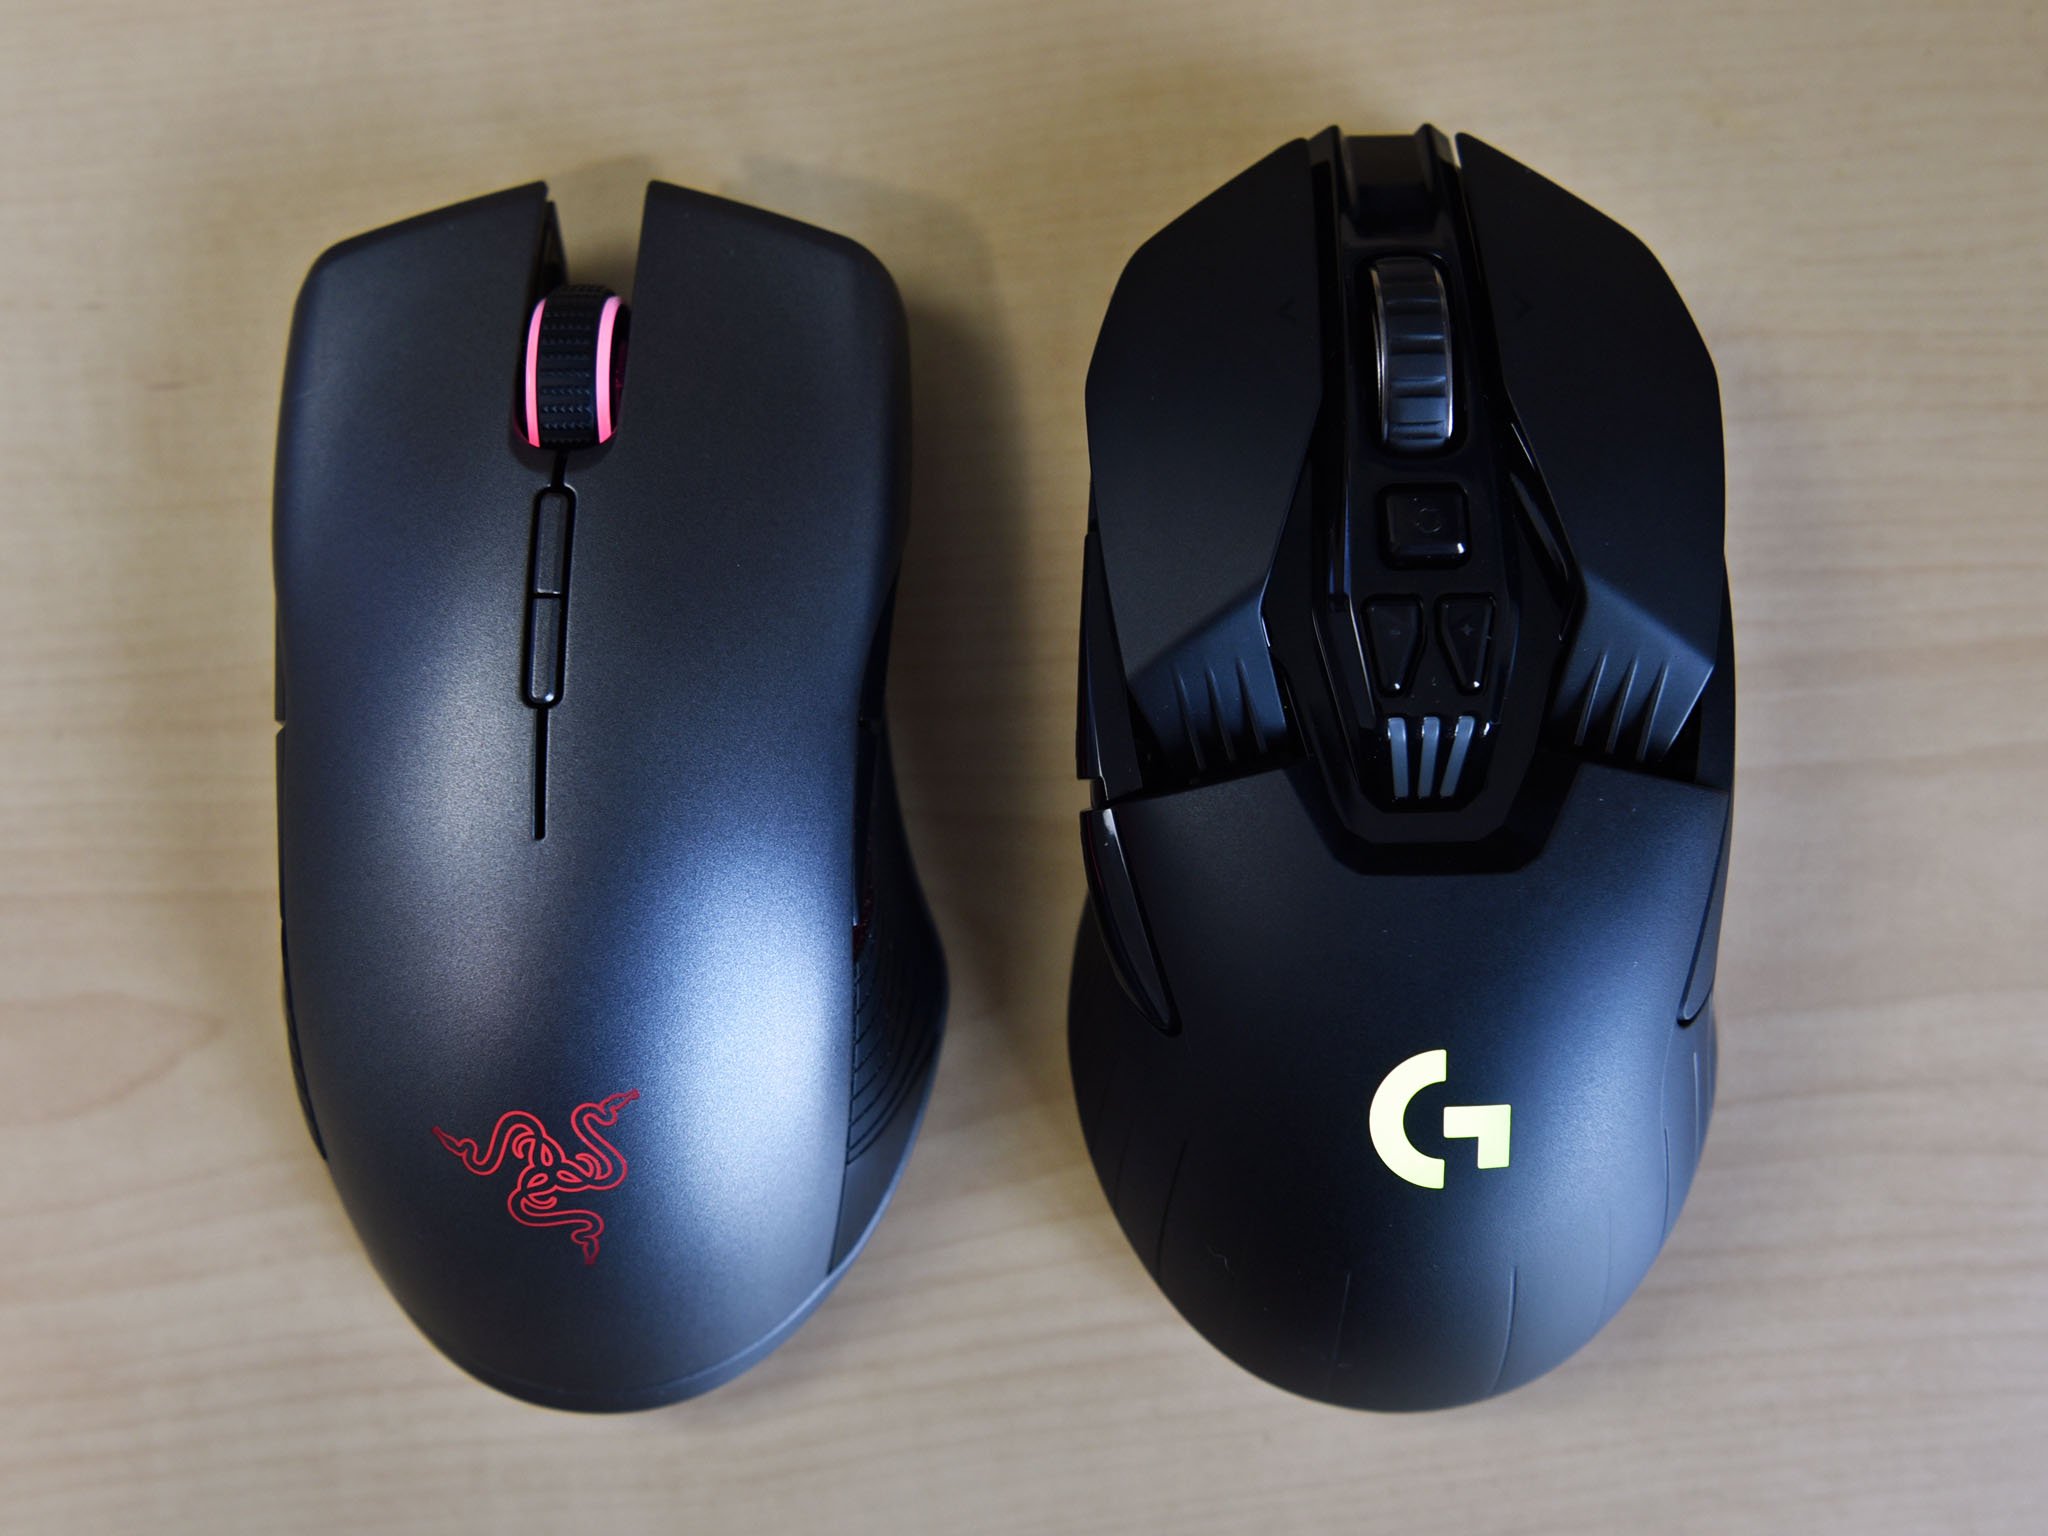 Clearing up misconceptions about laser mouse and optical mice